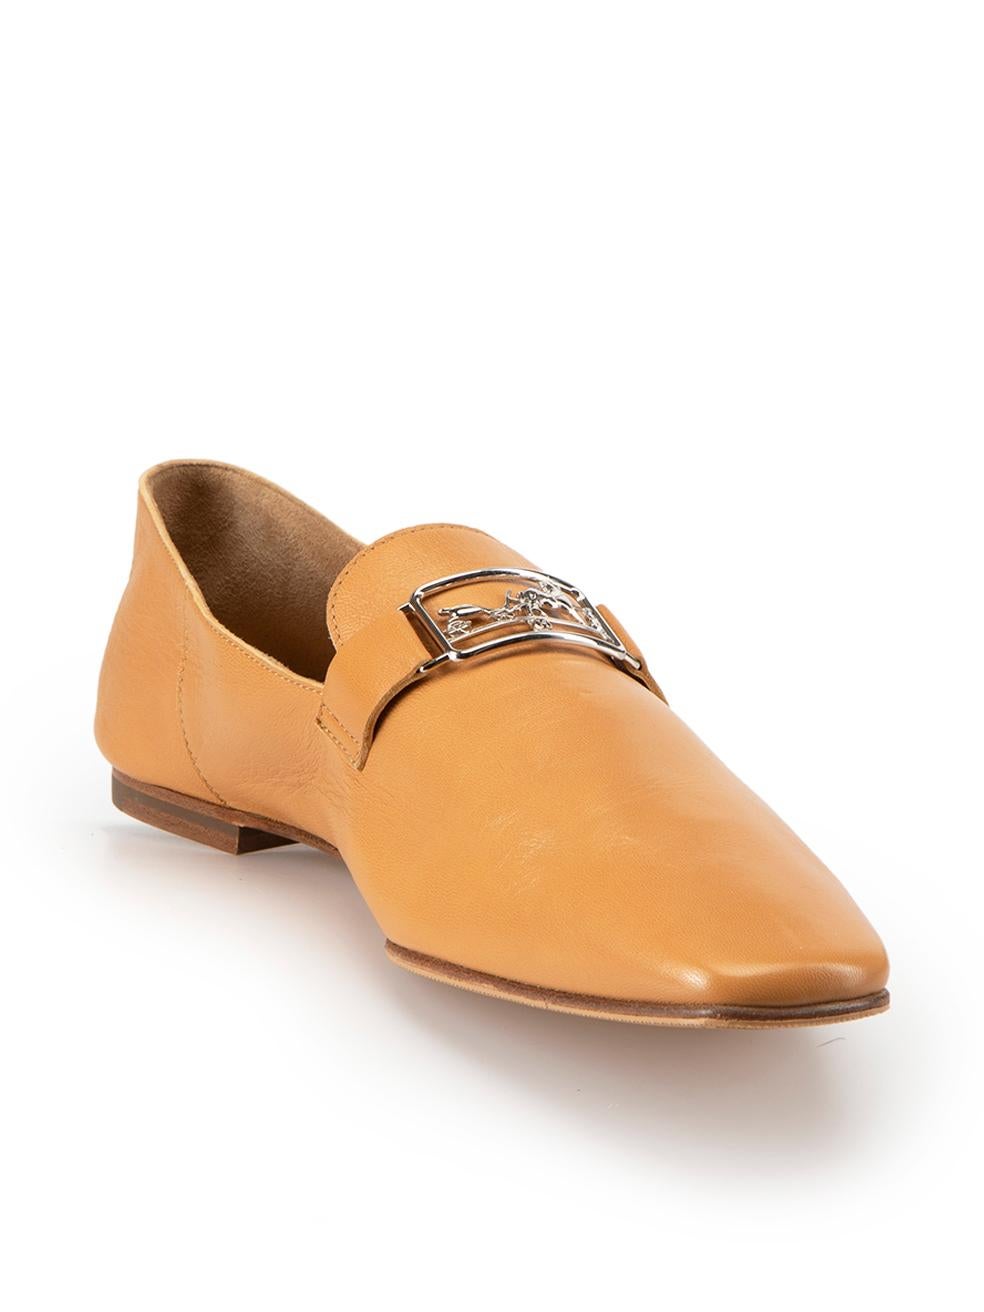 CONDITION is Very good. Minimal wear to loafers is evident. Minimal creasing to leather on this used Hermès designer resale item. Please note that these shoes have been resoled



Details


Brown

Leather

Slip-on loafers

Flat